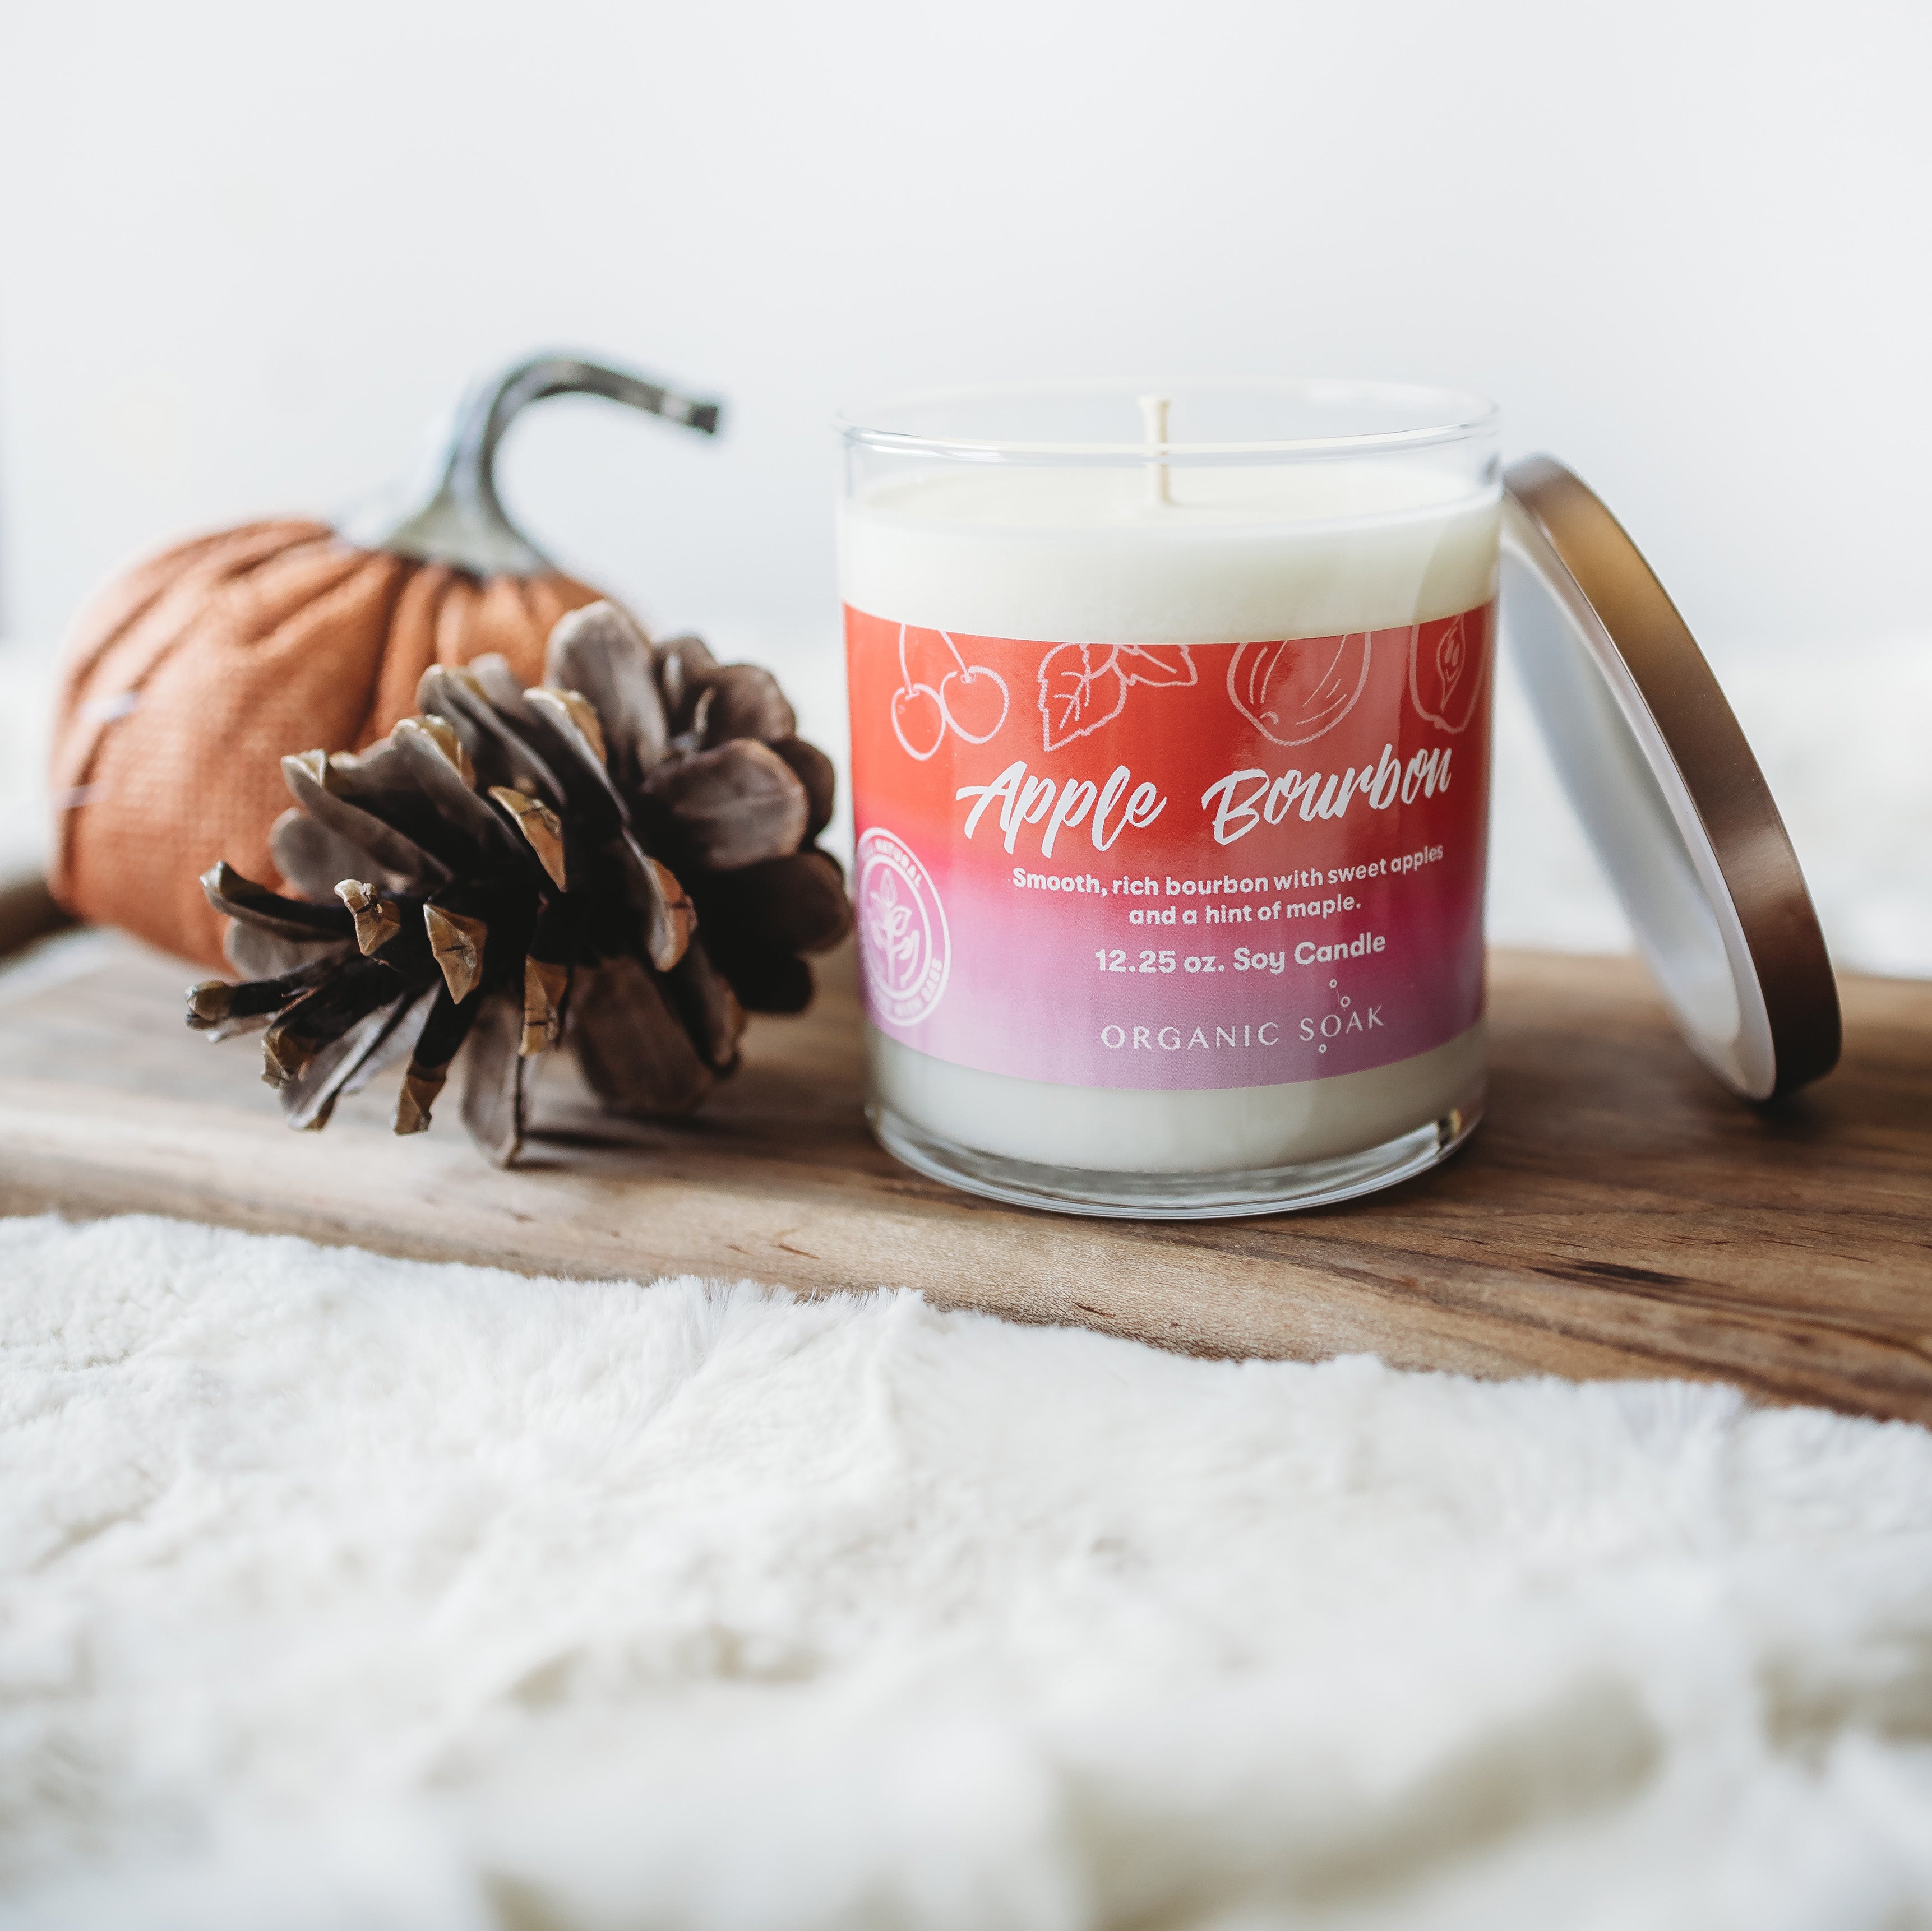 Apple Bourbon Scented Soy Candle